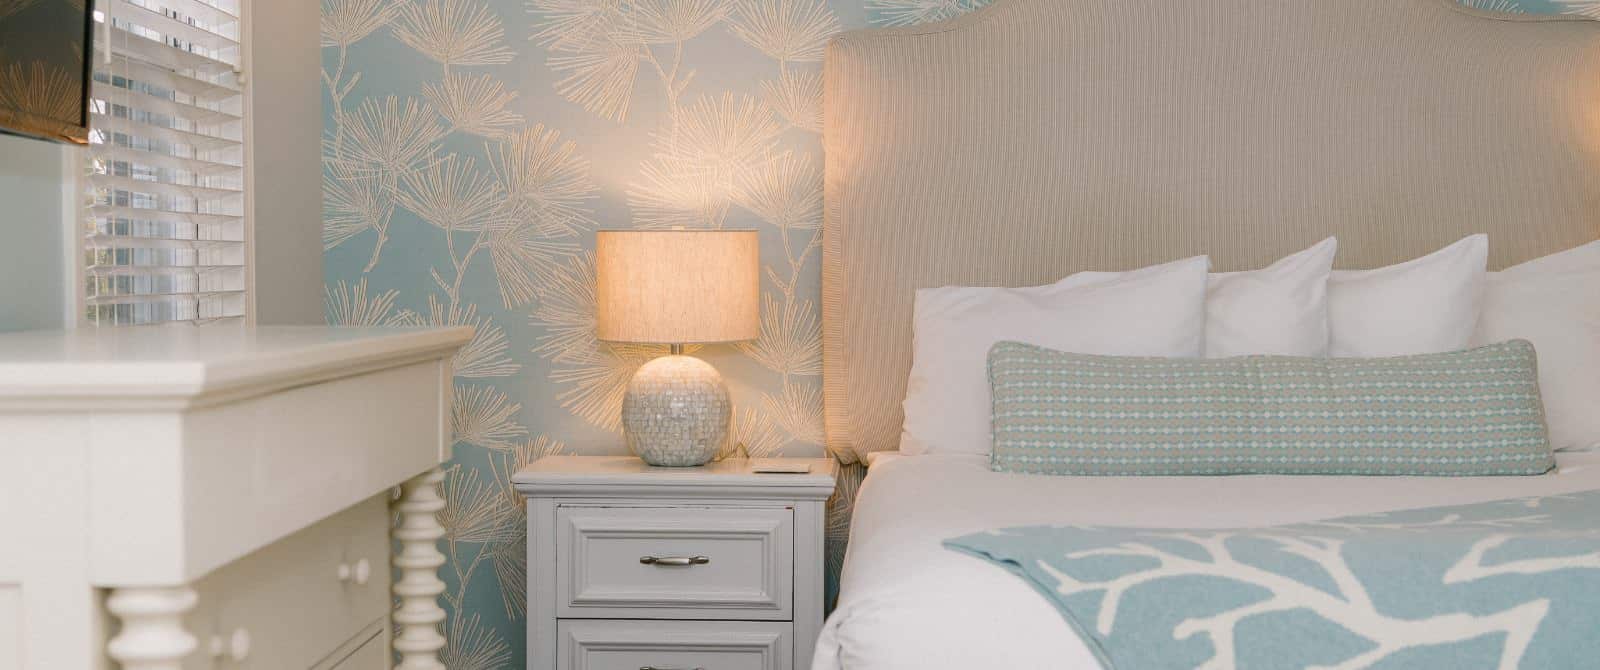 Close up view of bed with light tan upholstered headboard, white bedding, light blue and green patterned long pillow, white small dresser, and lighted lamp